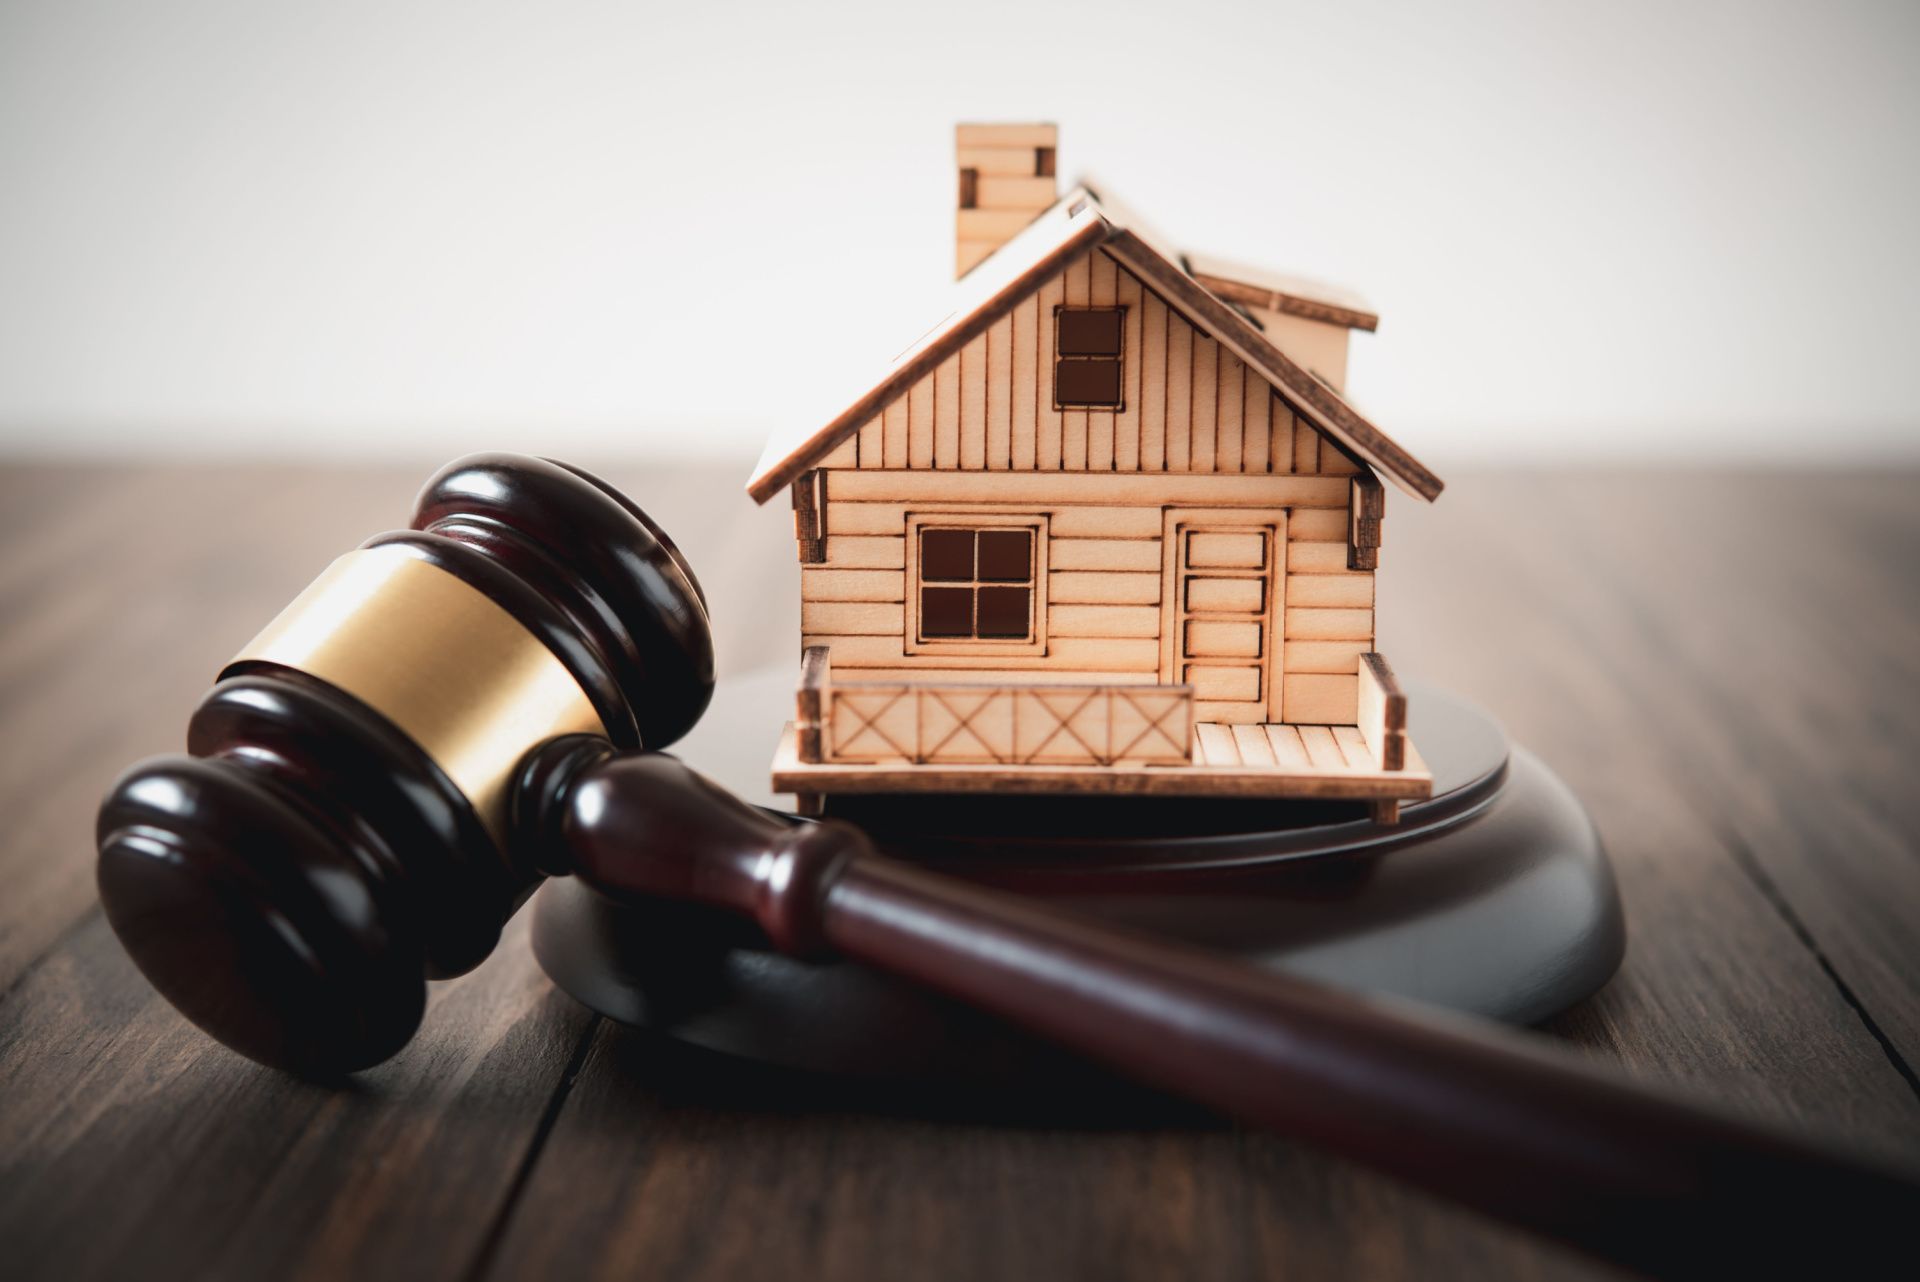 a wooden house is sitting on a wooden table next to a wooden gavel .